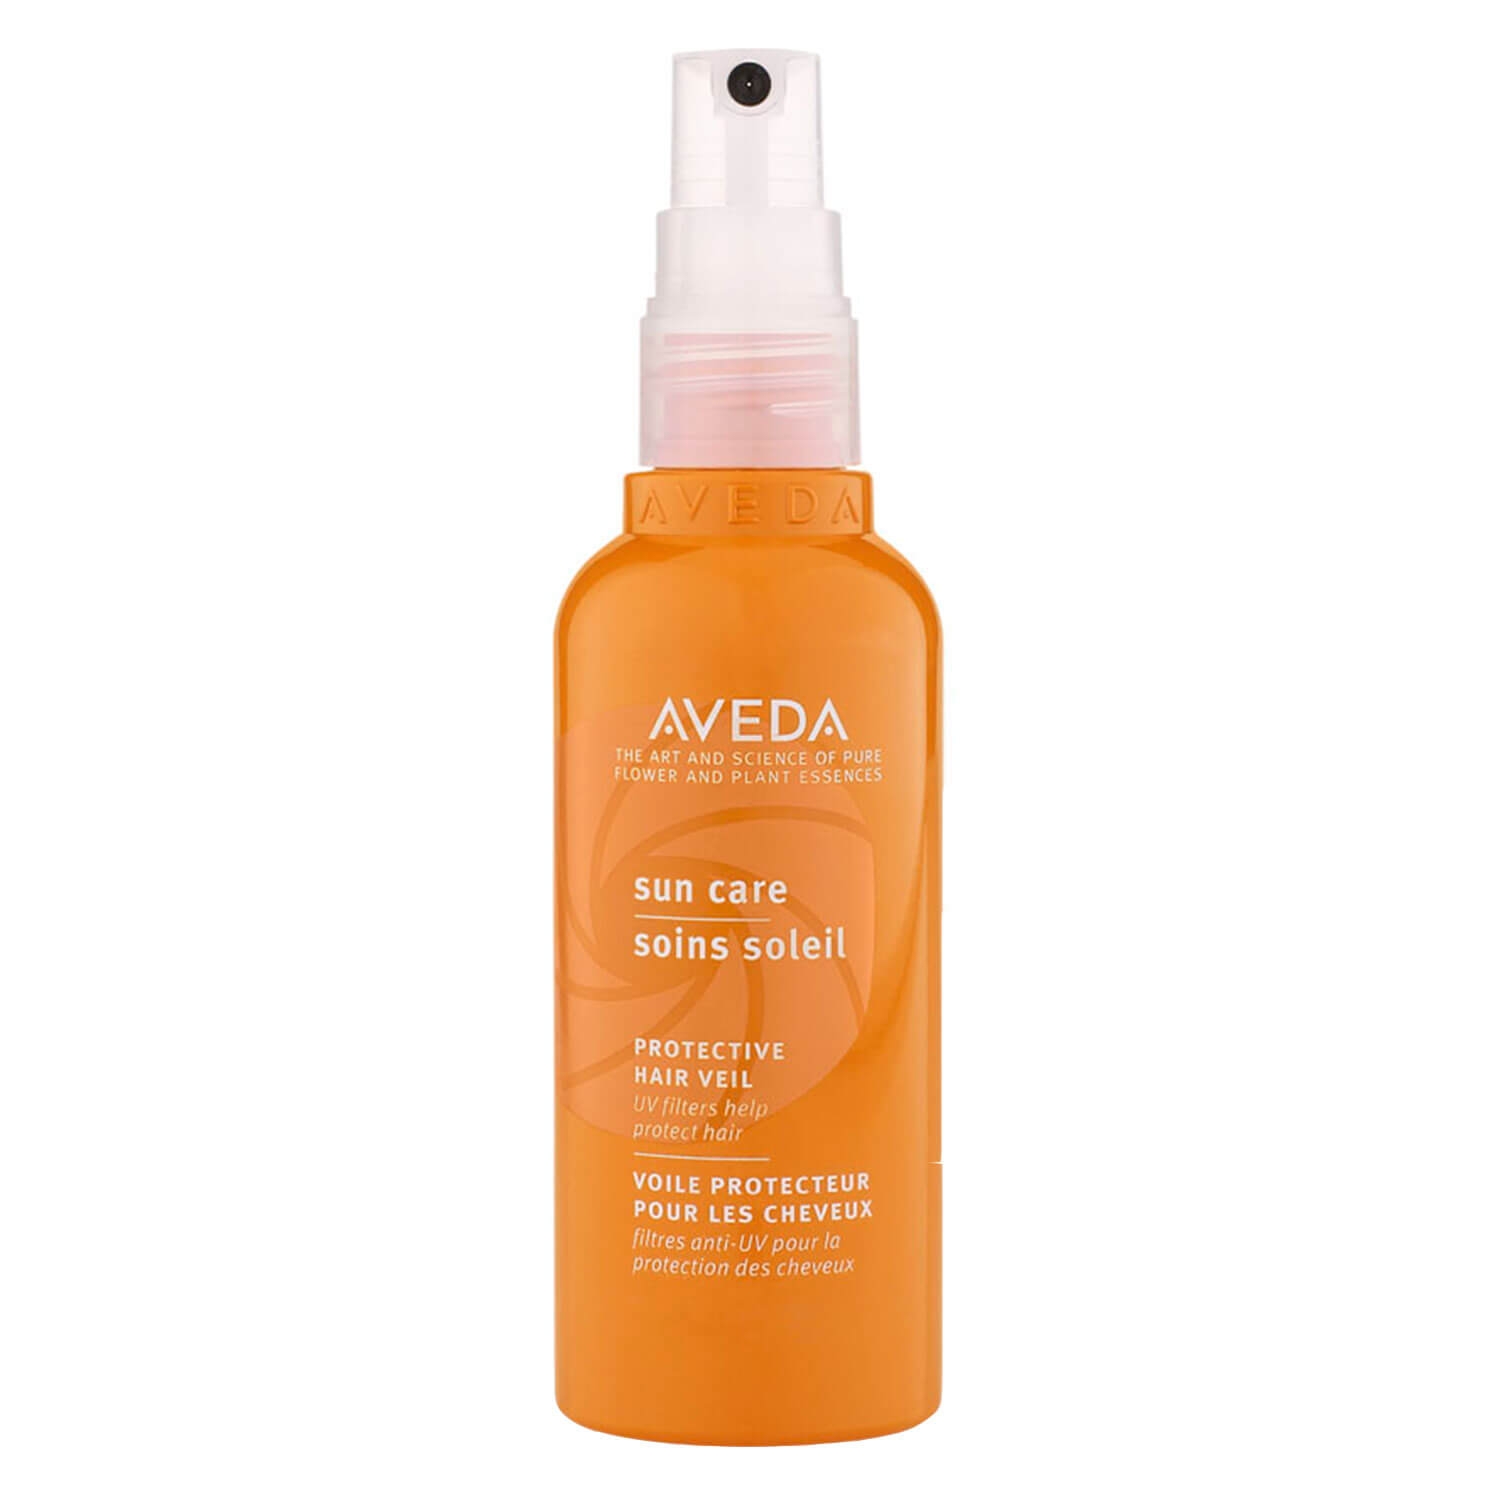 Product image from aveda sun care - protective hair veil